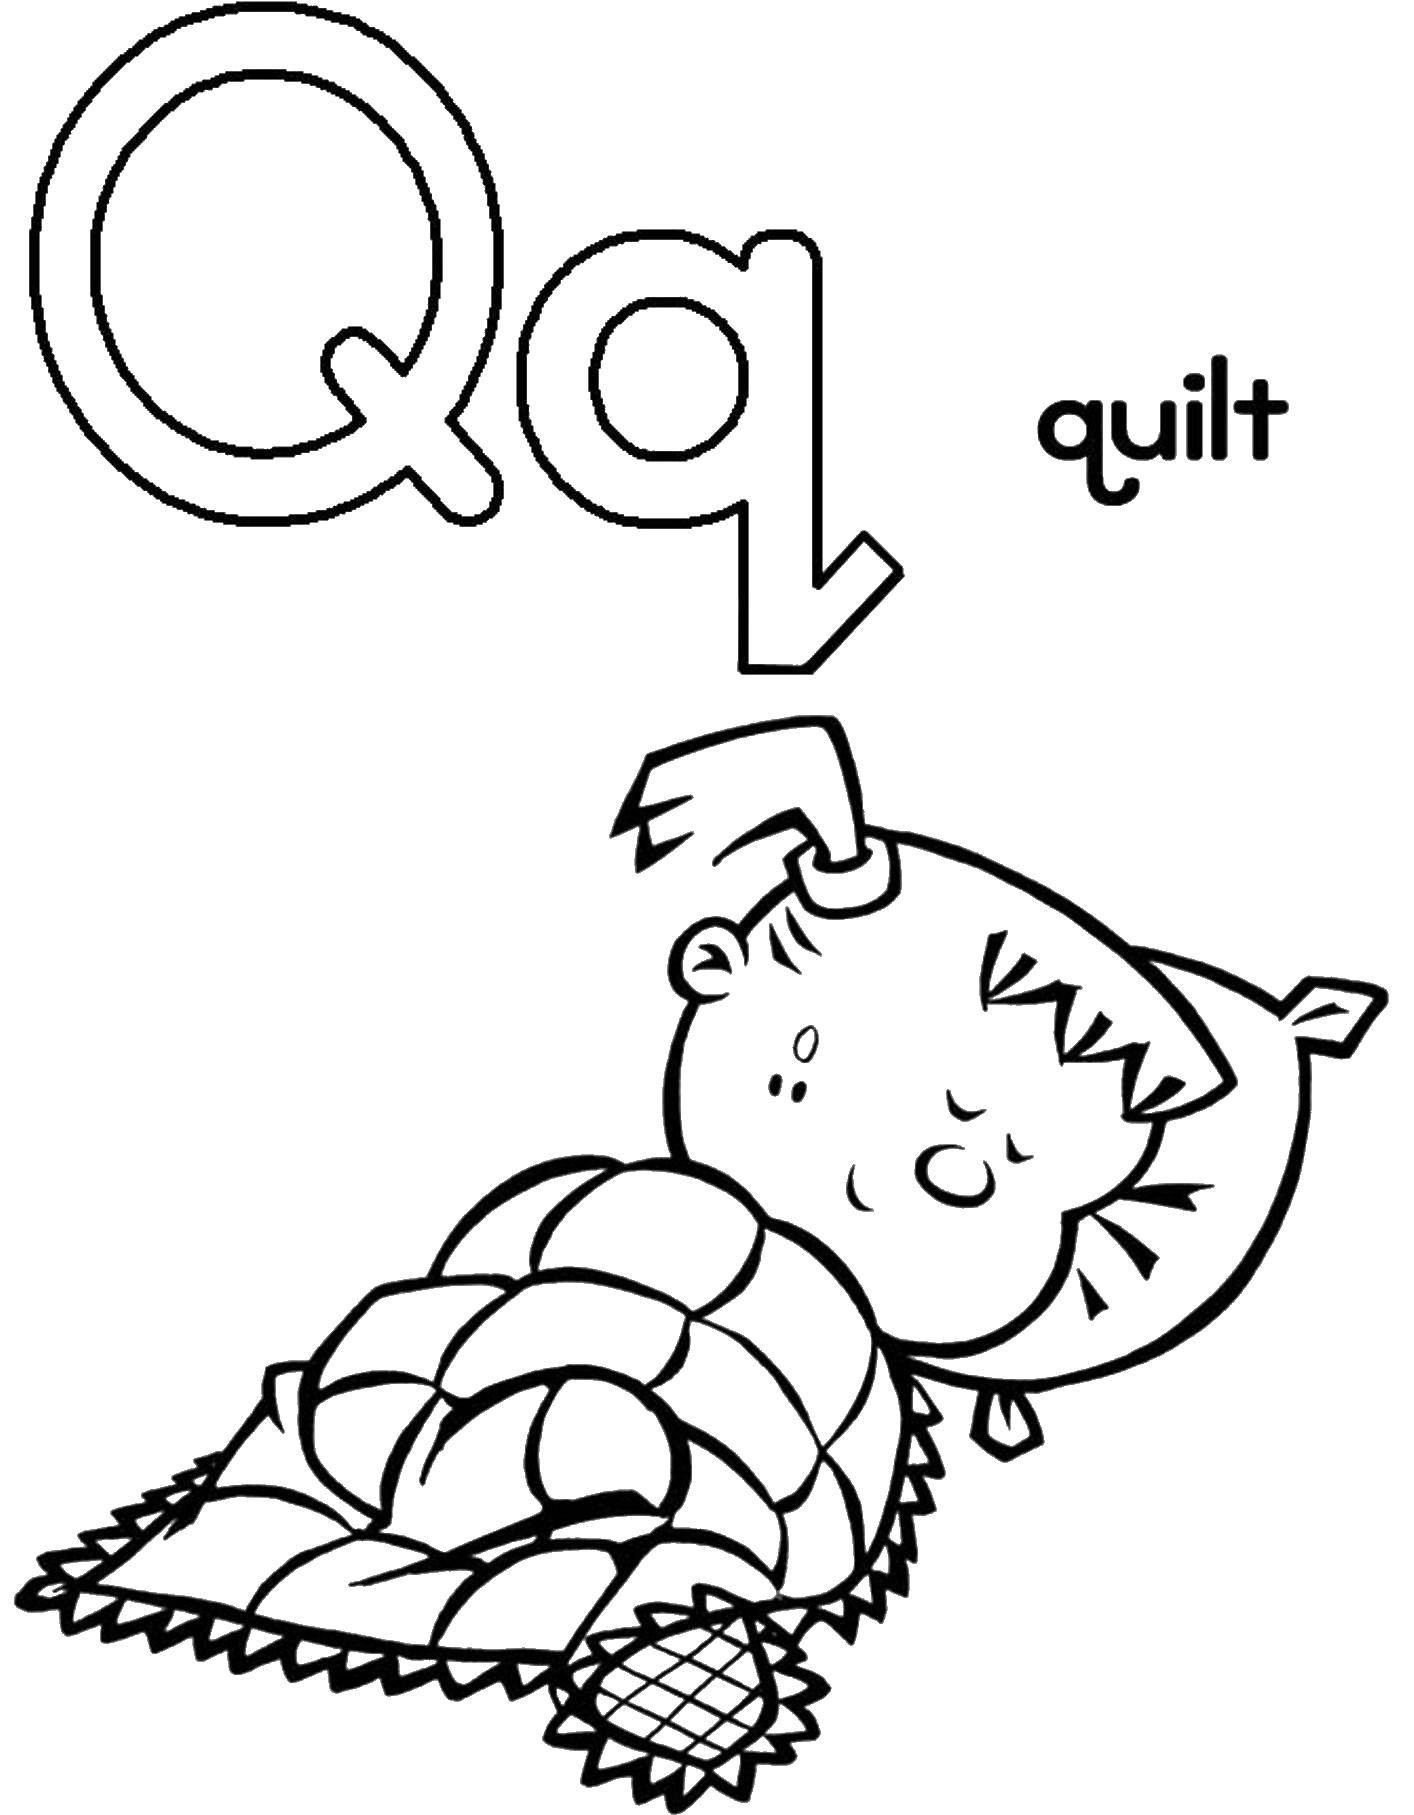 Coloring Quiet girl sleeping. Category English alphabet. Tags:  English alphabet picture.